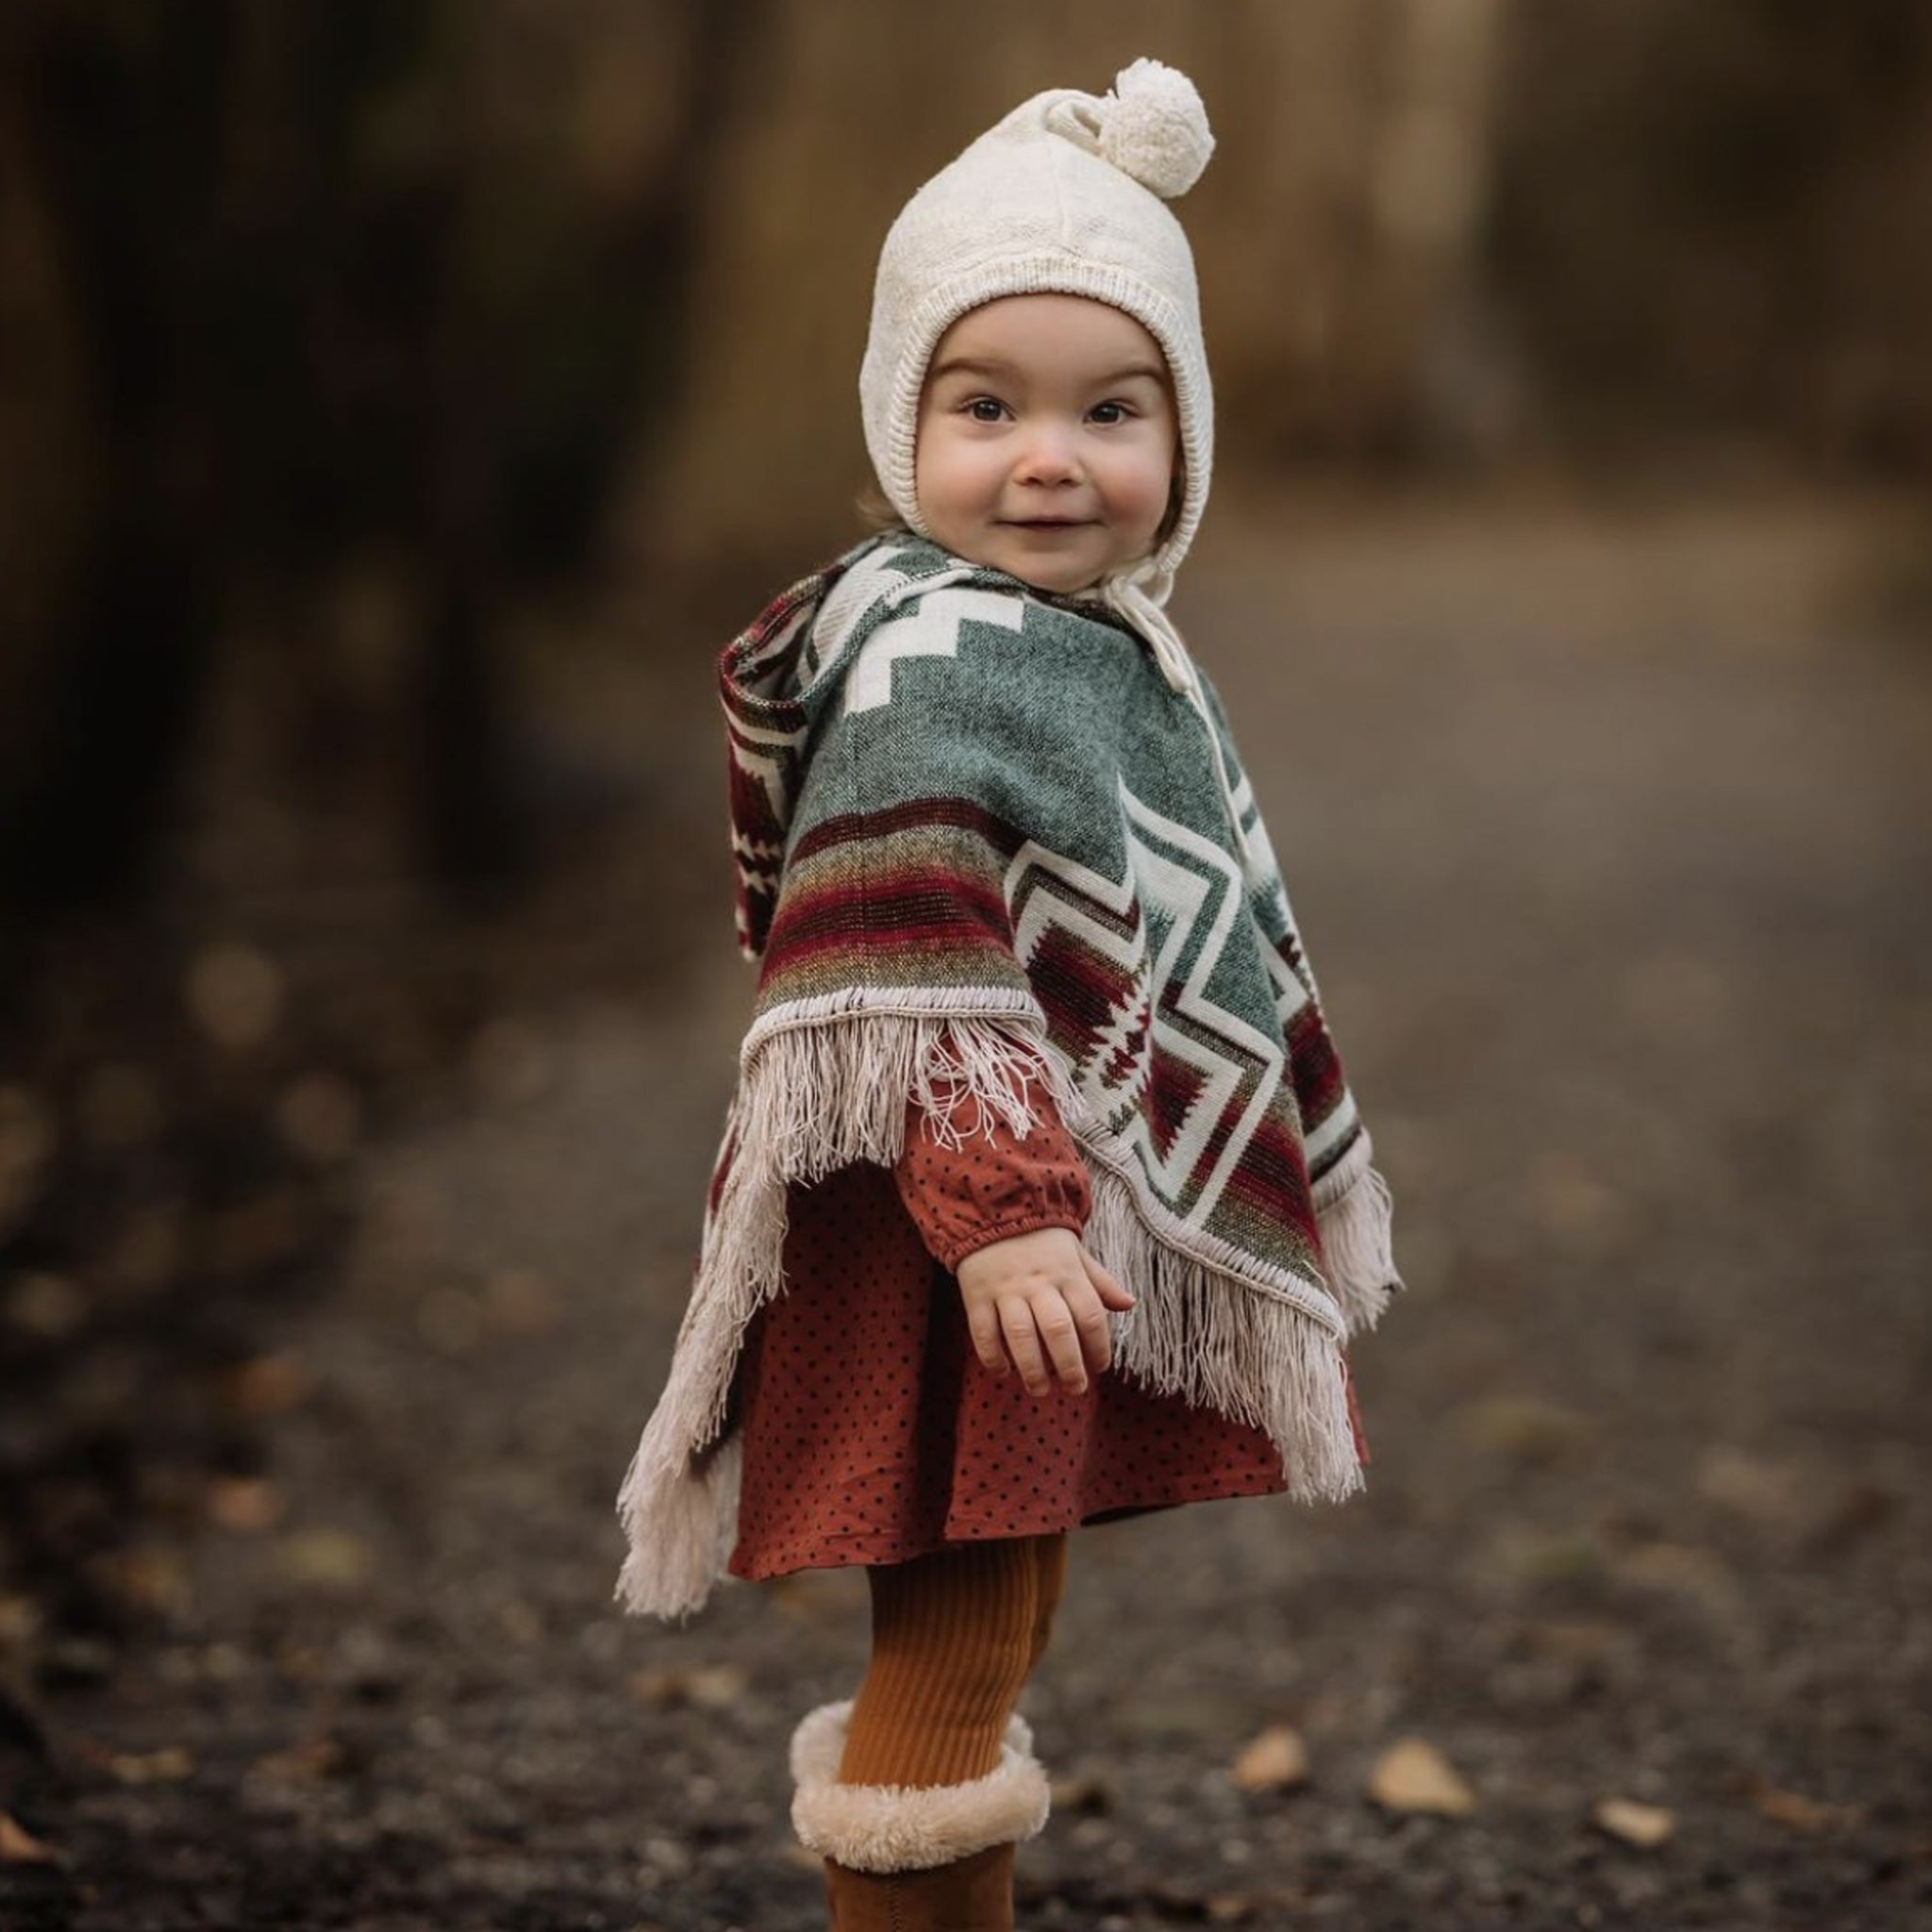 Cielo – The Little Poncho